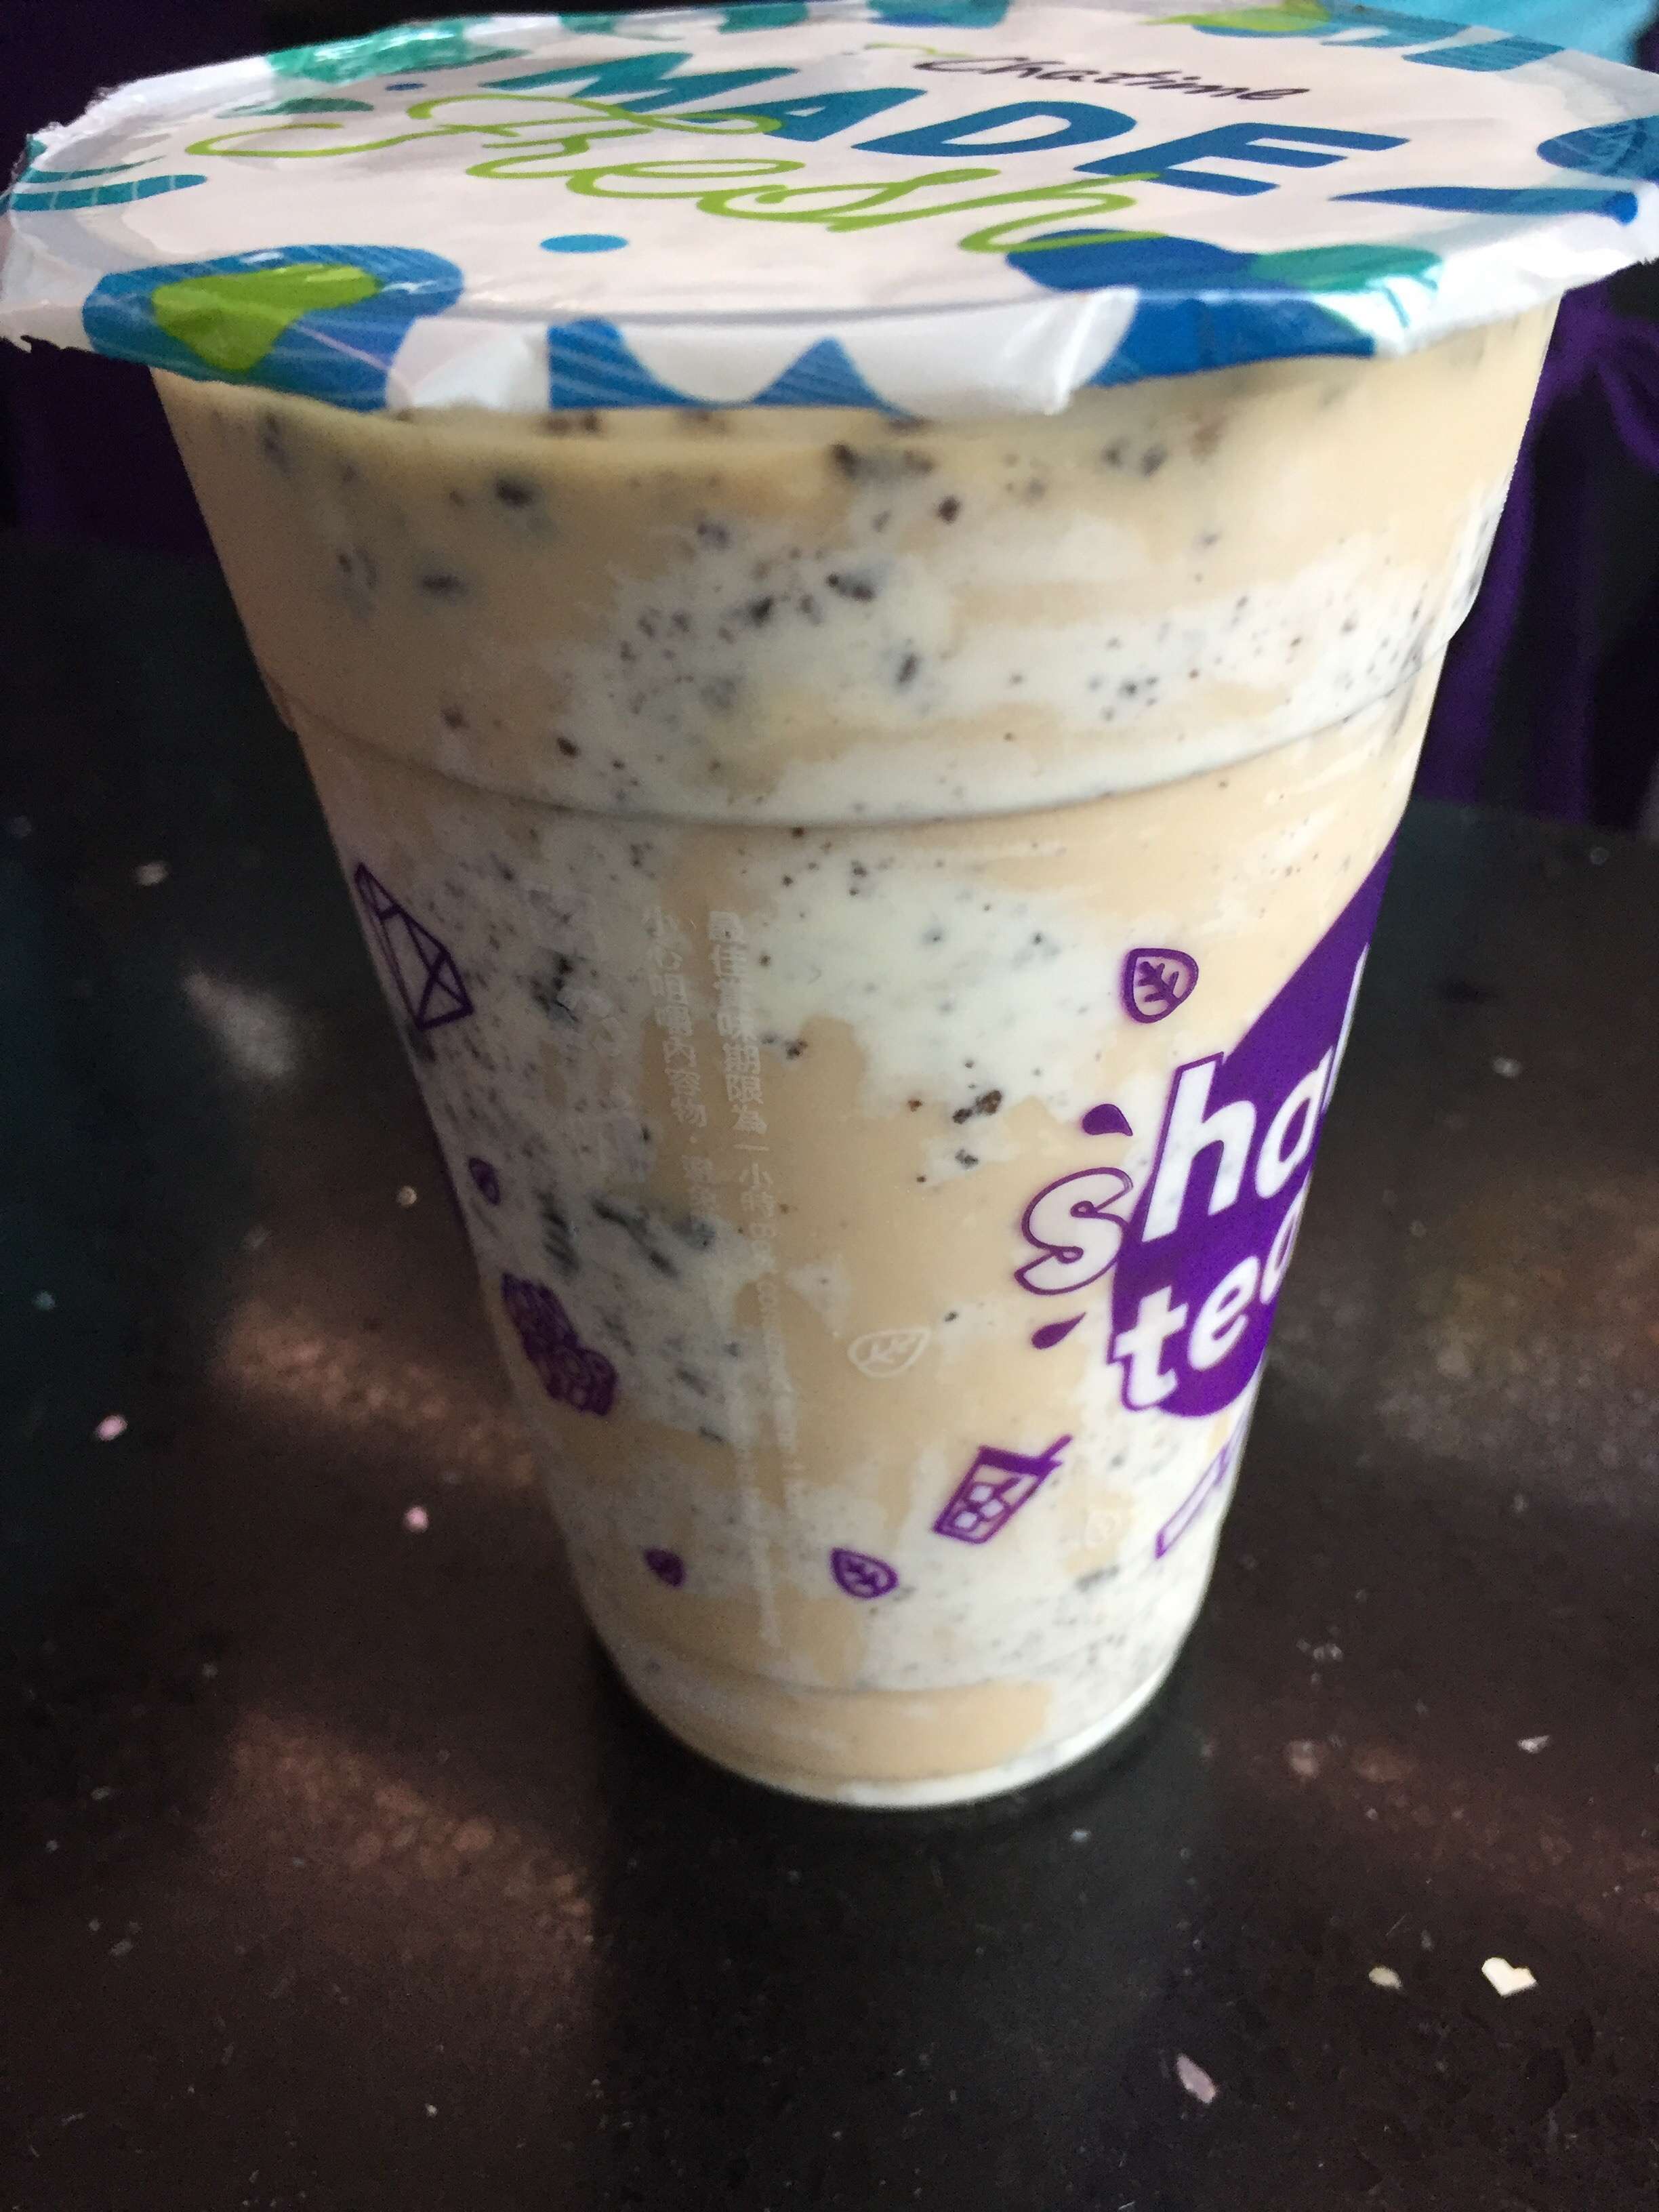 Chatime Reviews User Reviews For Chatime Ortigas Mandaluyong City